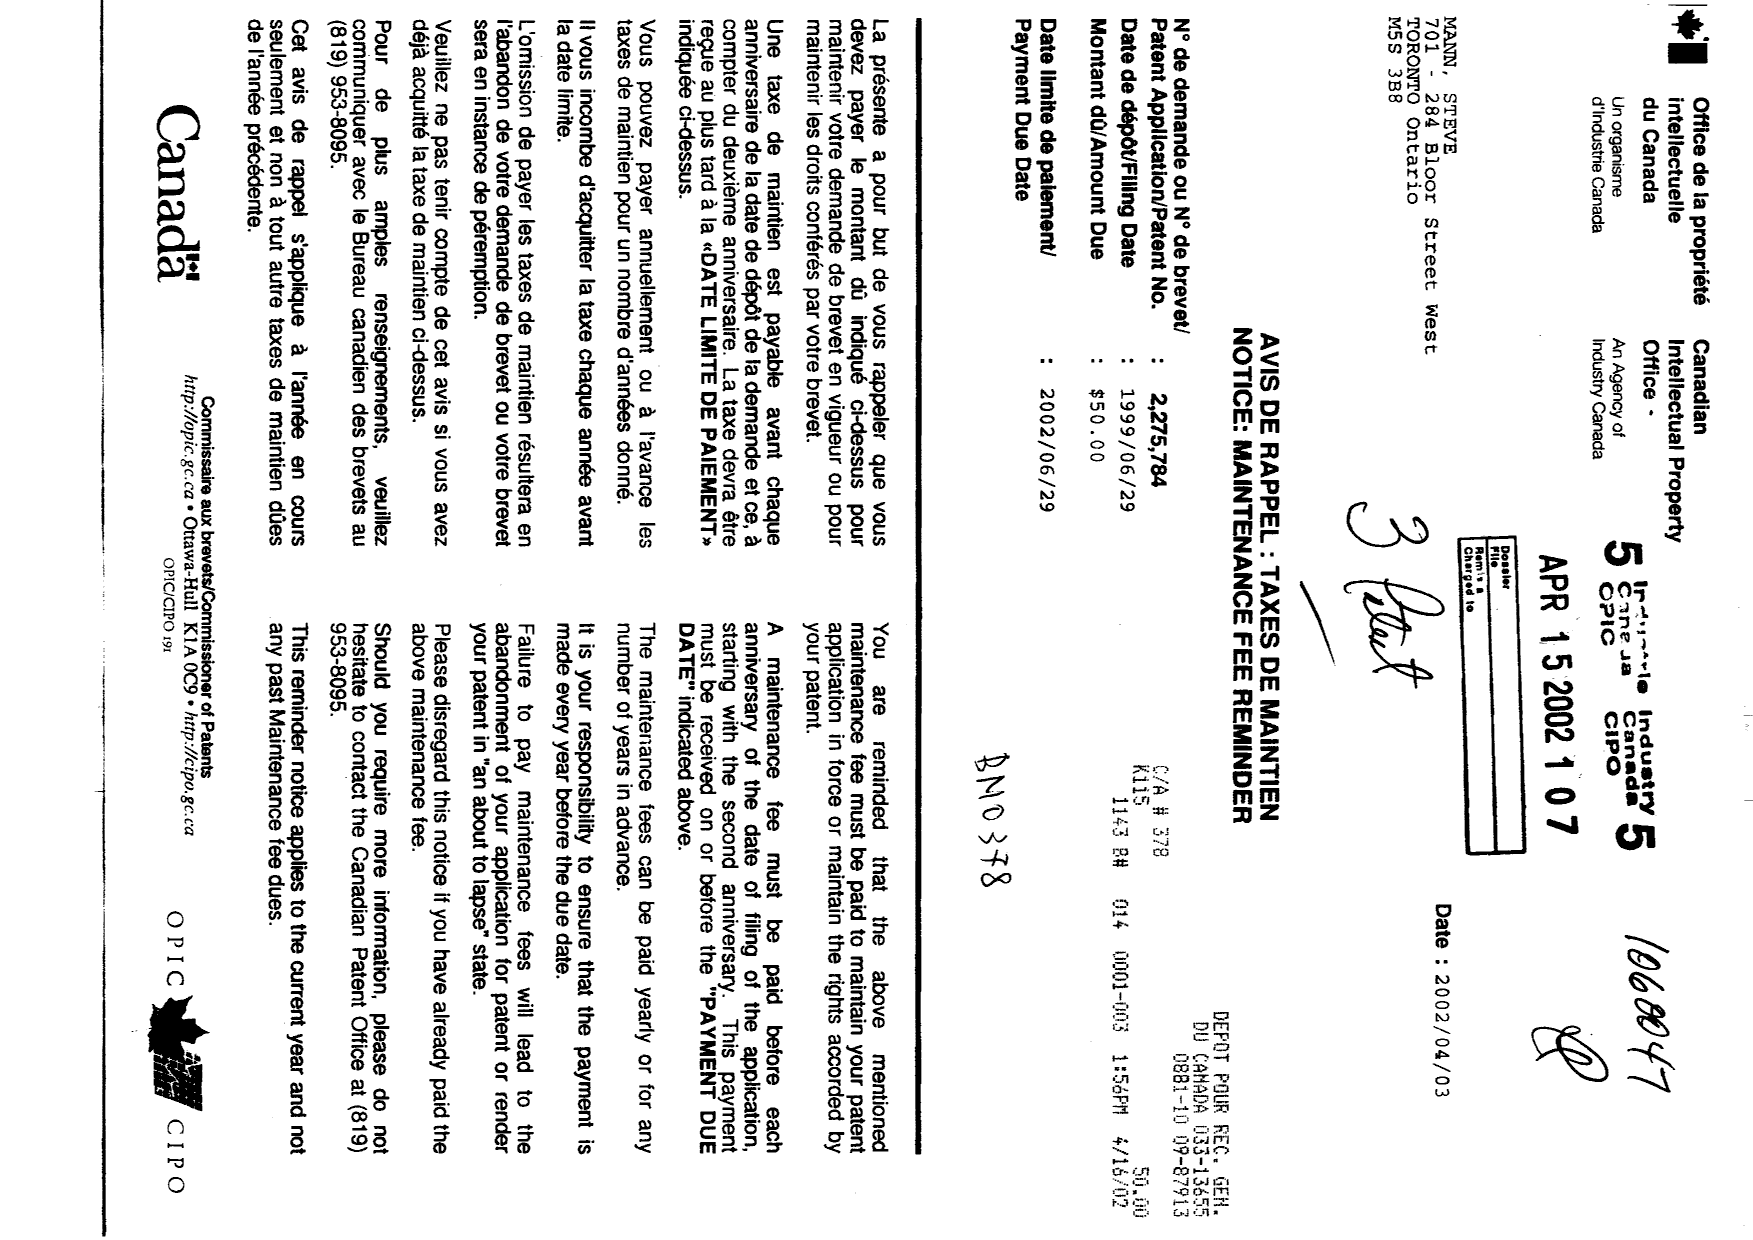 Canadian Patent Document 2275784. Fees 20011215. Image 1 of 1